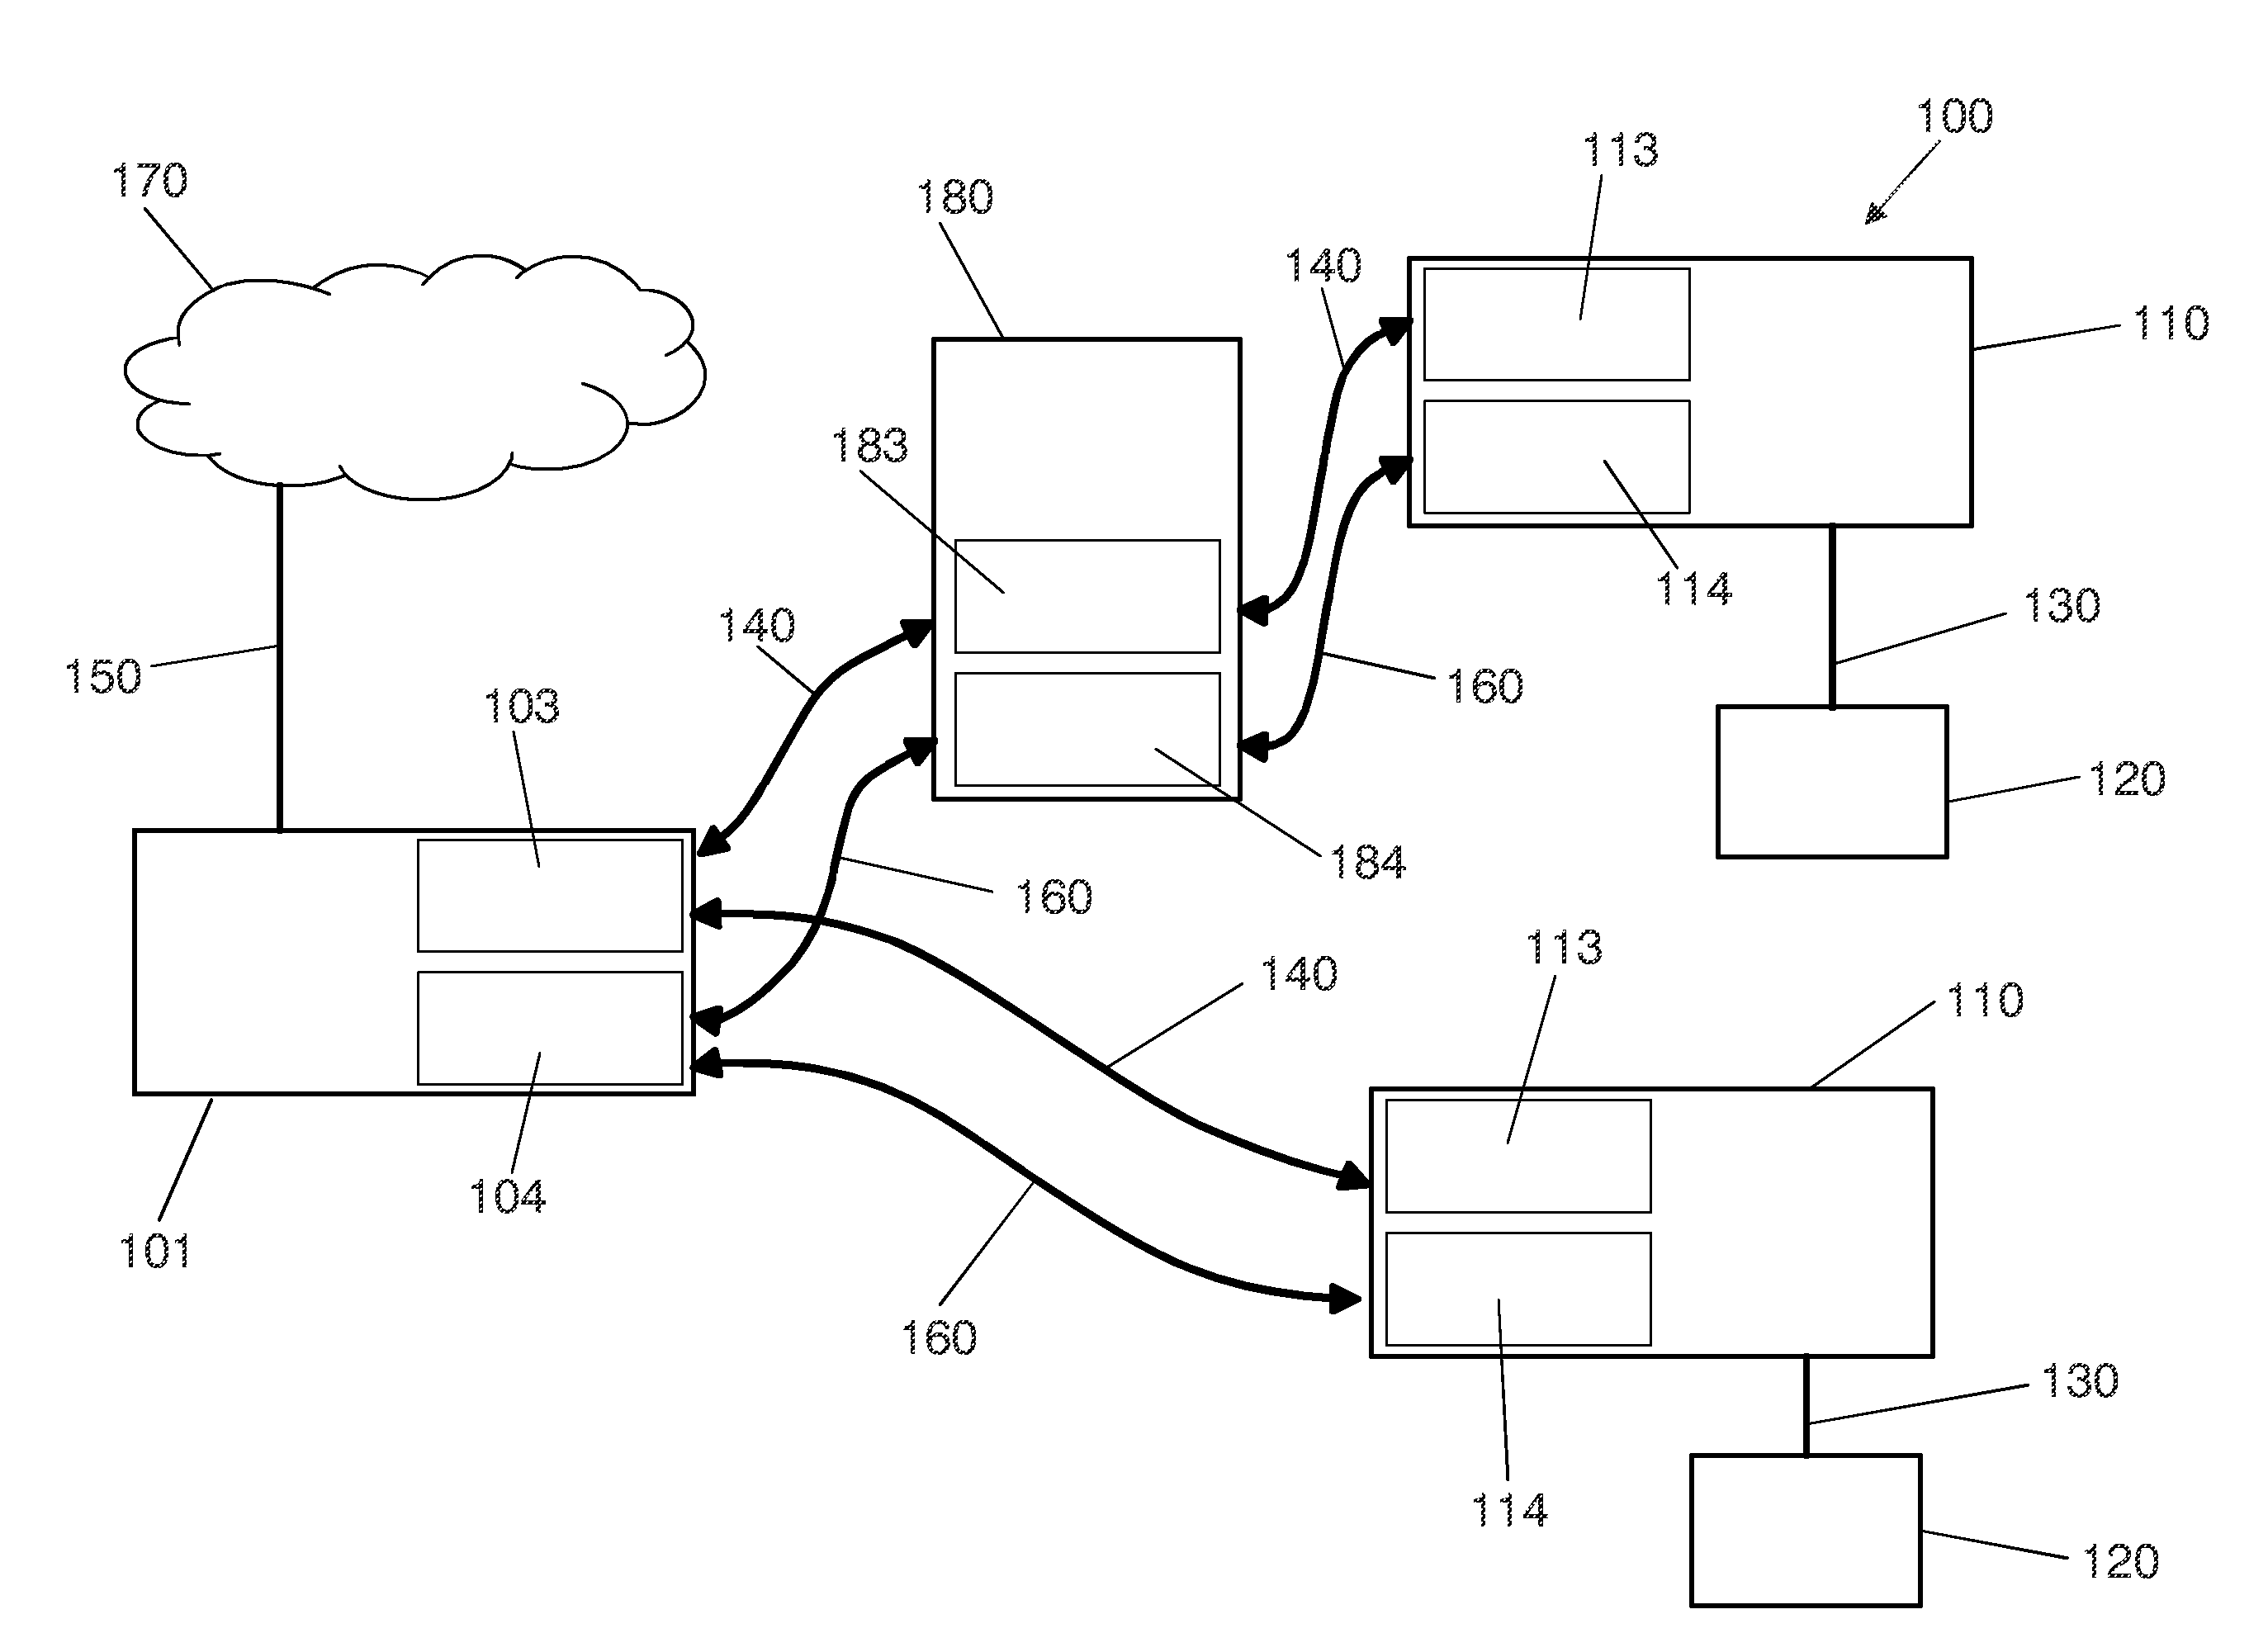 Method for distributing wireless audio and video signals indoors